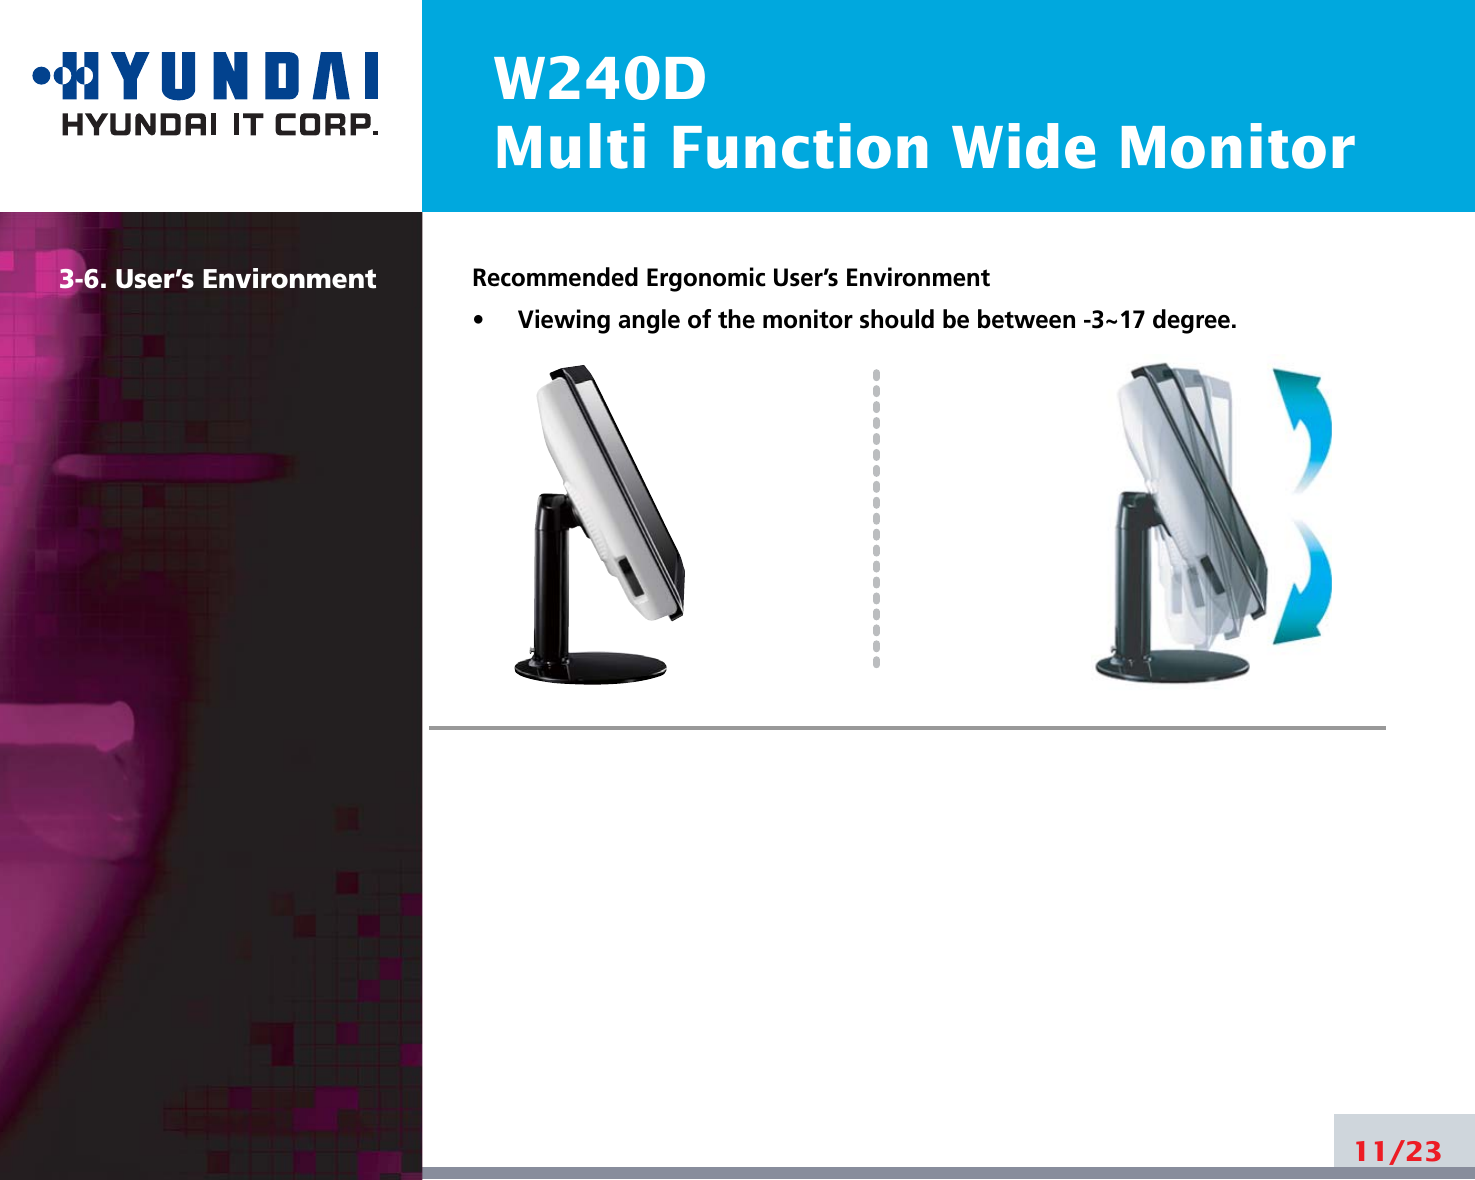 W240DMulti Function Wide Monitor11/233-6. User’s Environment Recommended Ergonomic User’s Environment•     Viewing angle of the monitor should be between -3~17 degree.